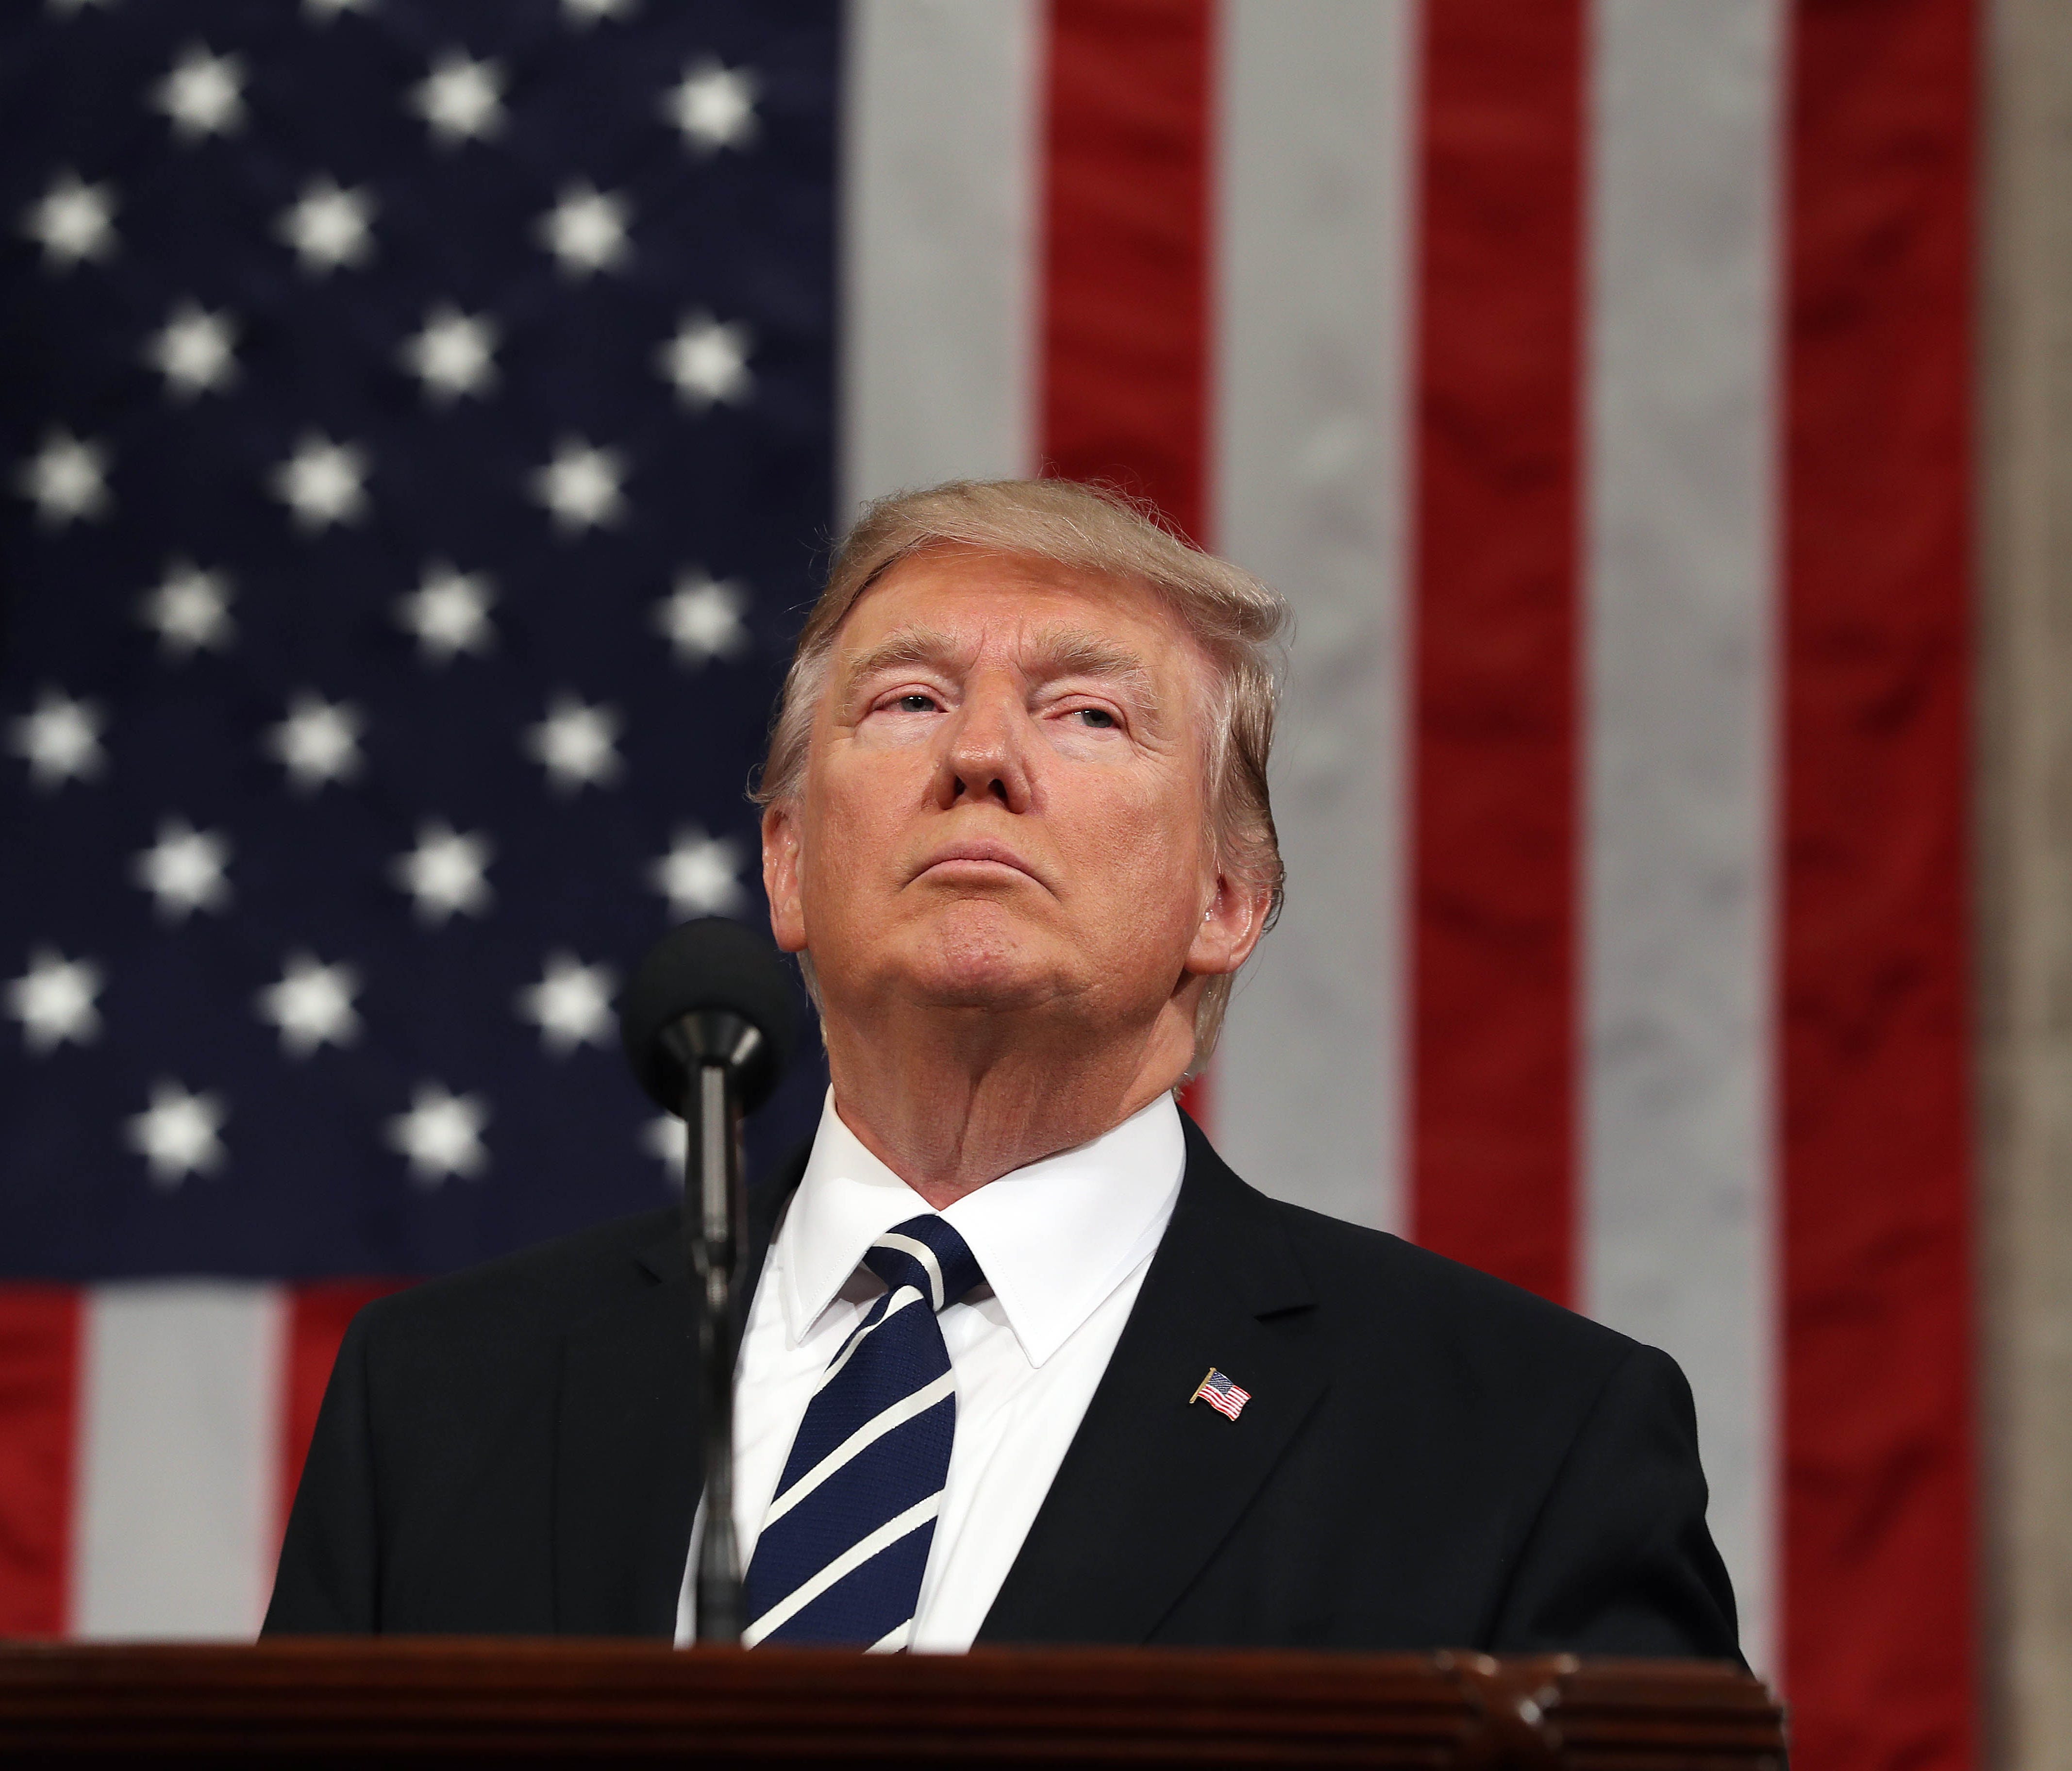 President Trump speaks before a joint session of Congress on Feb. 28, 2017.